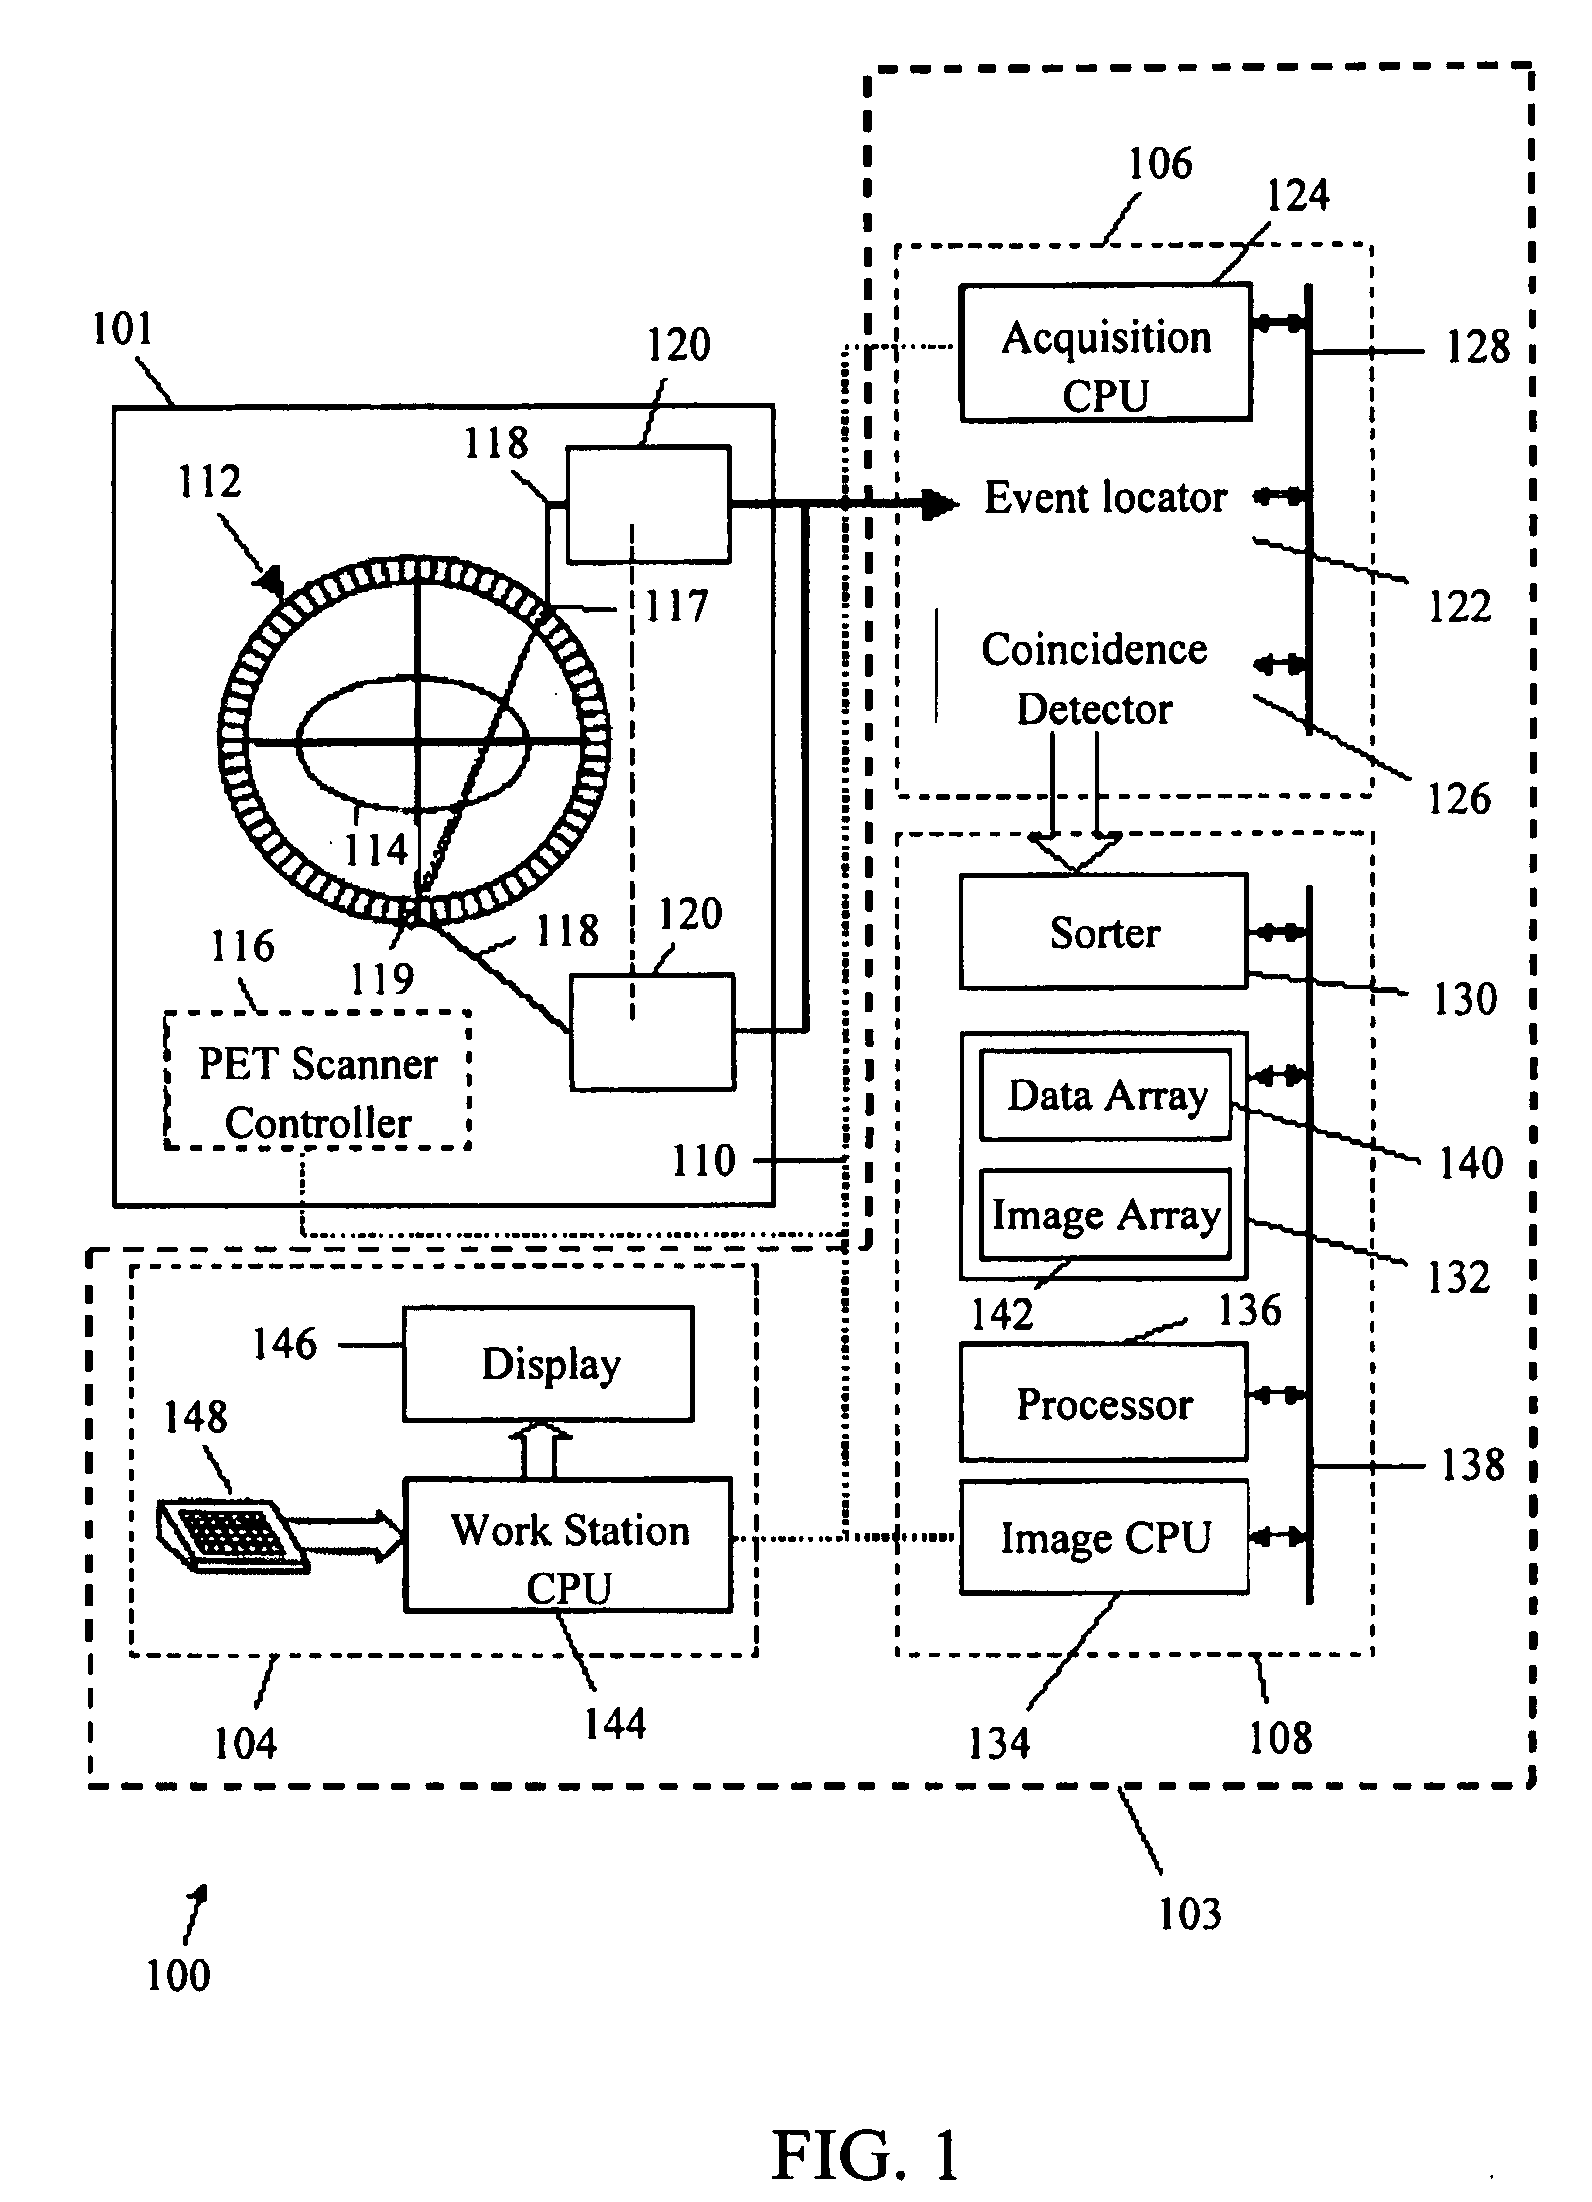 Method and system for calibrating a time of flight positron emission tomography system